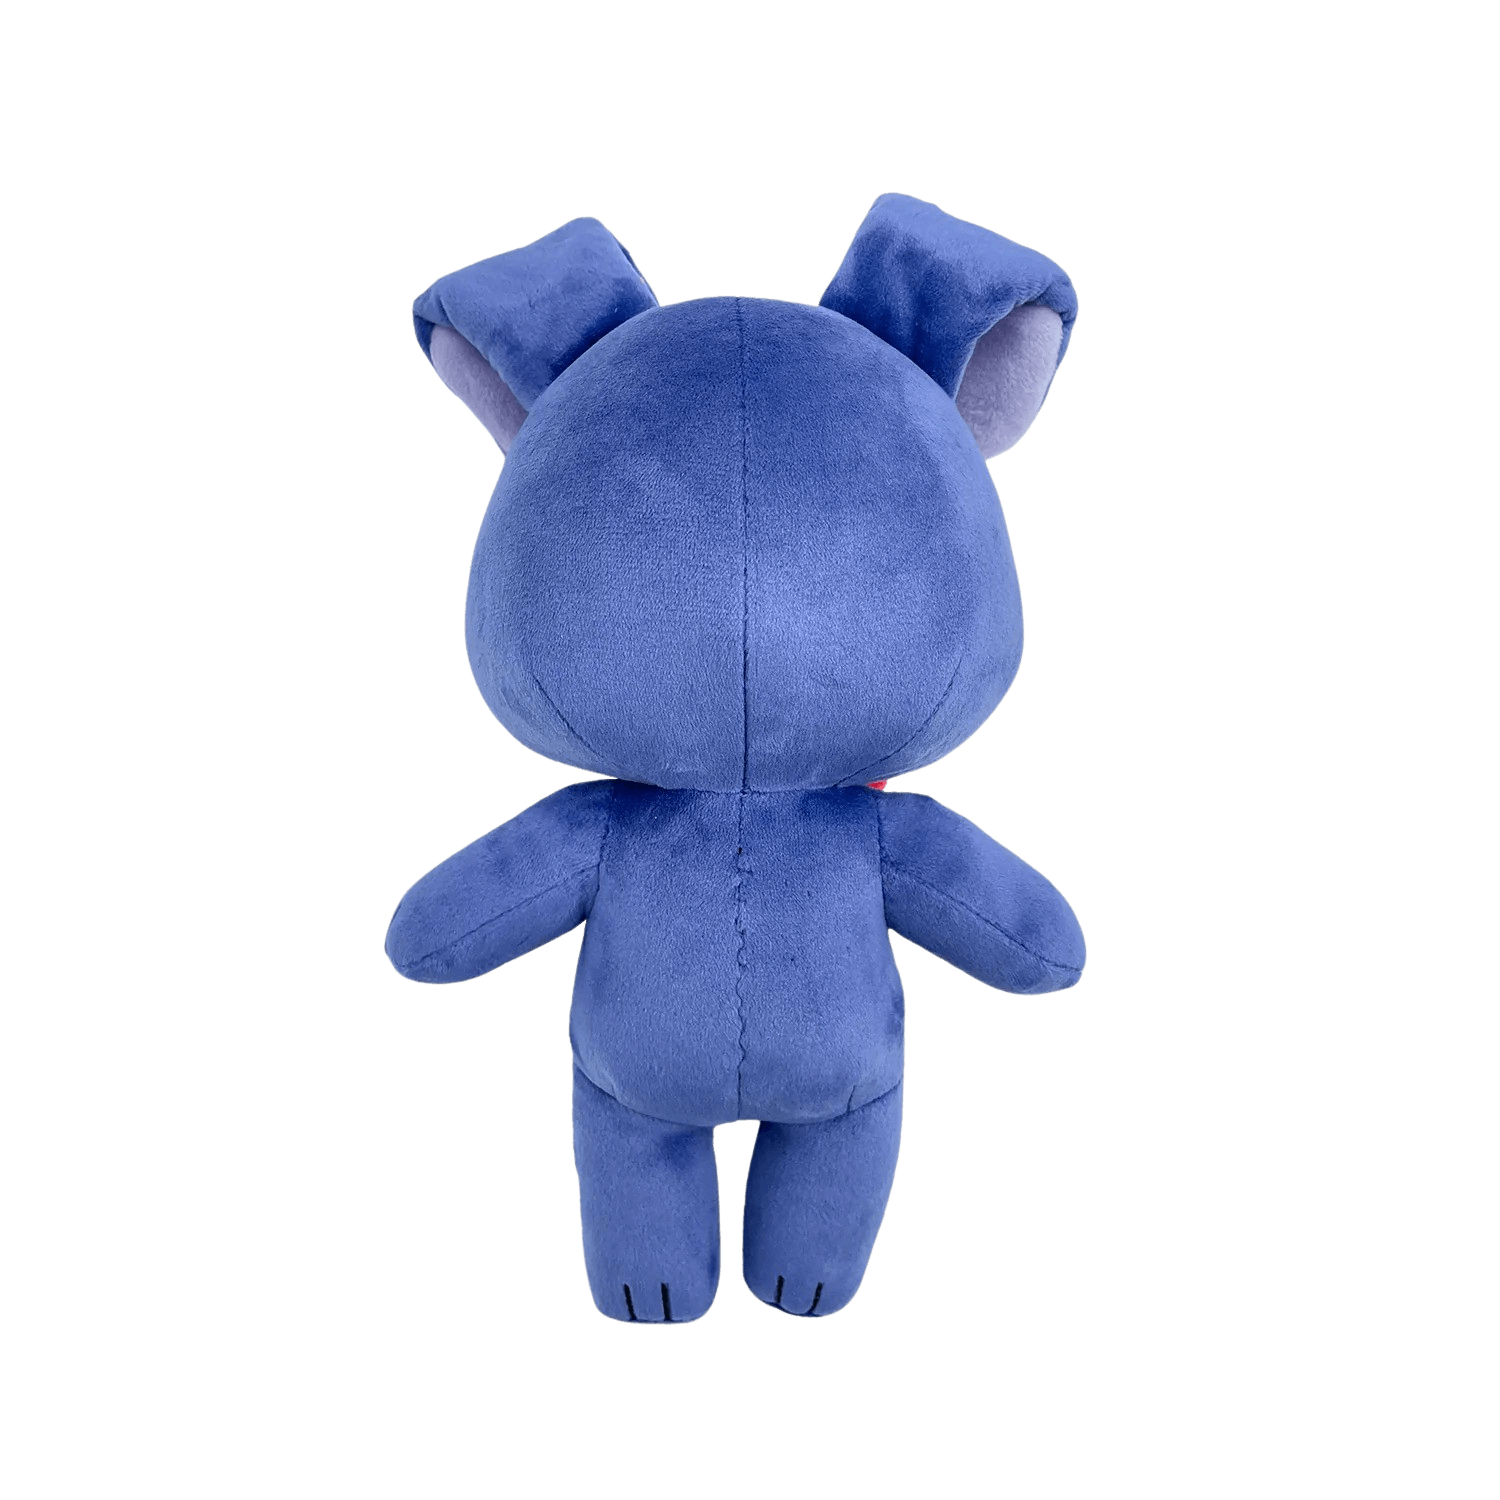 Youtooz - Five Nights at Freddy's - Chibi Bonnie Plush (9in) - The Card Vault